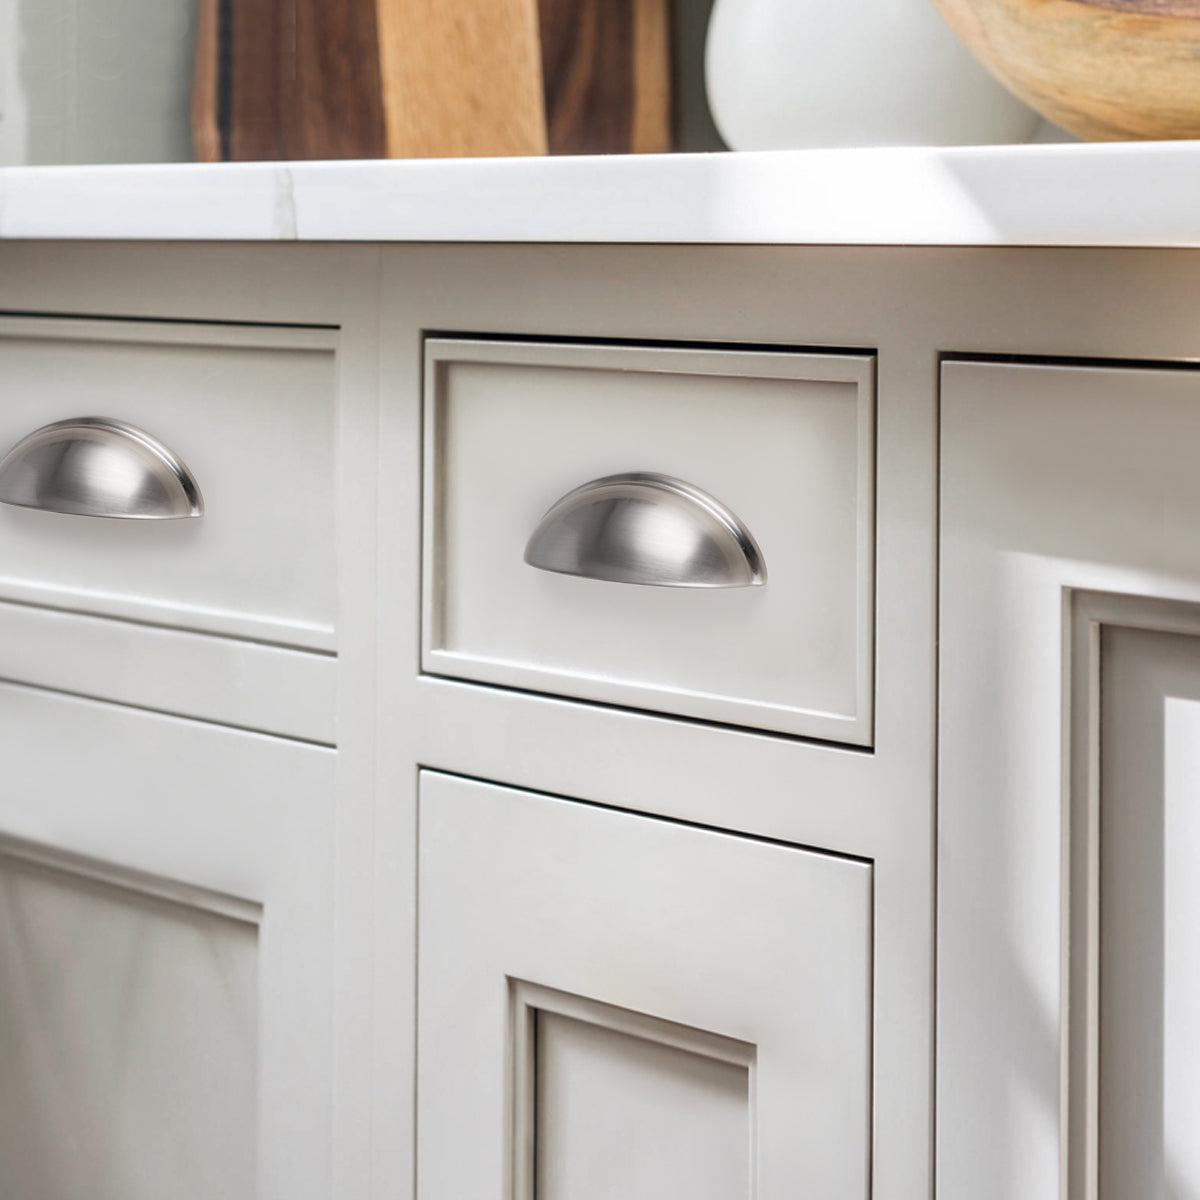 Satin Nickel Cup Pulls 76mm 3inch Hole Centers, Kitchen Cabinets